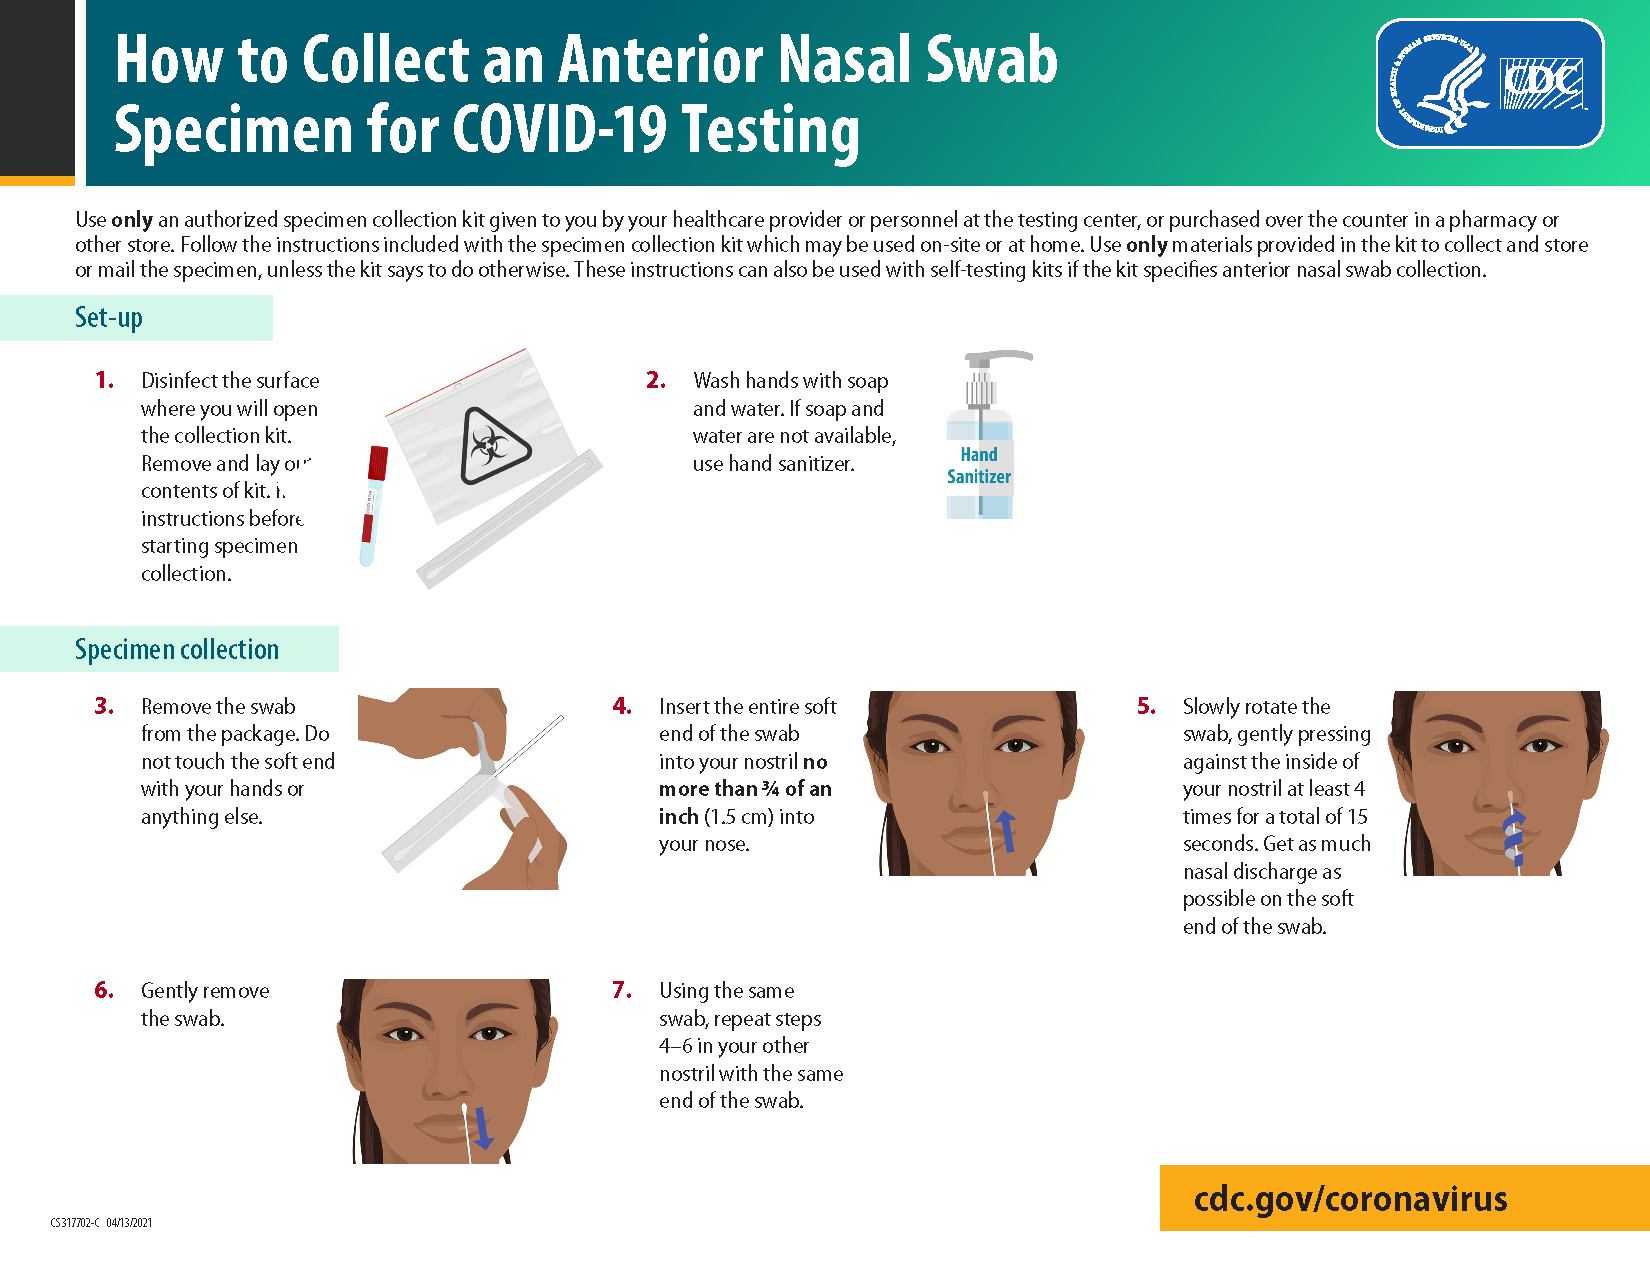 How to Collect An Anterior Nasal Swab Specimen for COVID-19 Testing